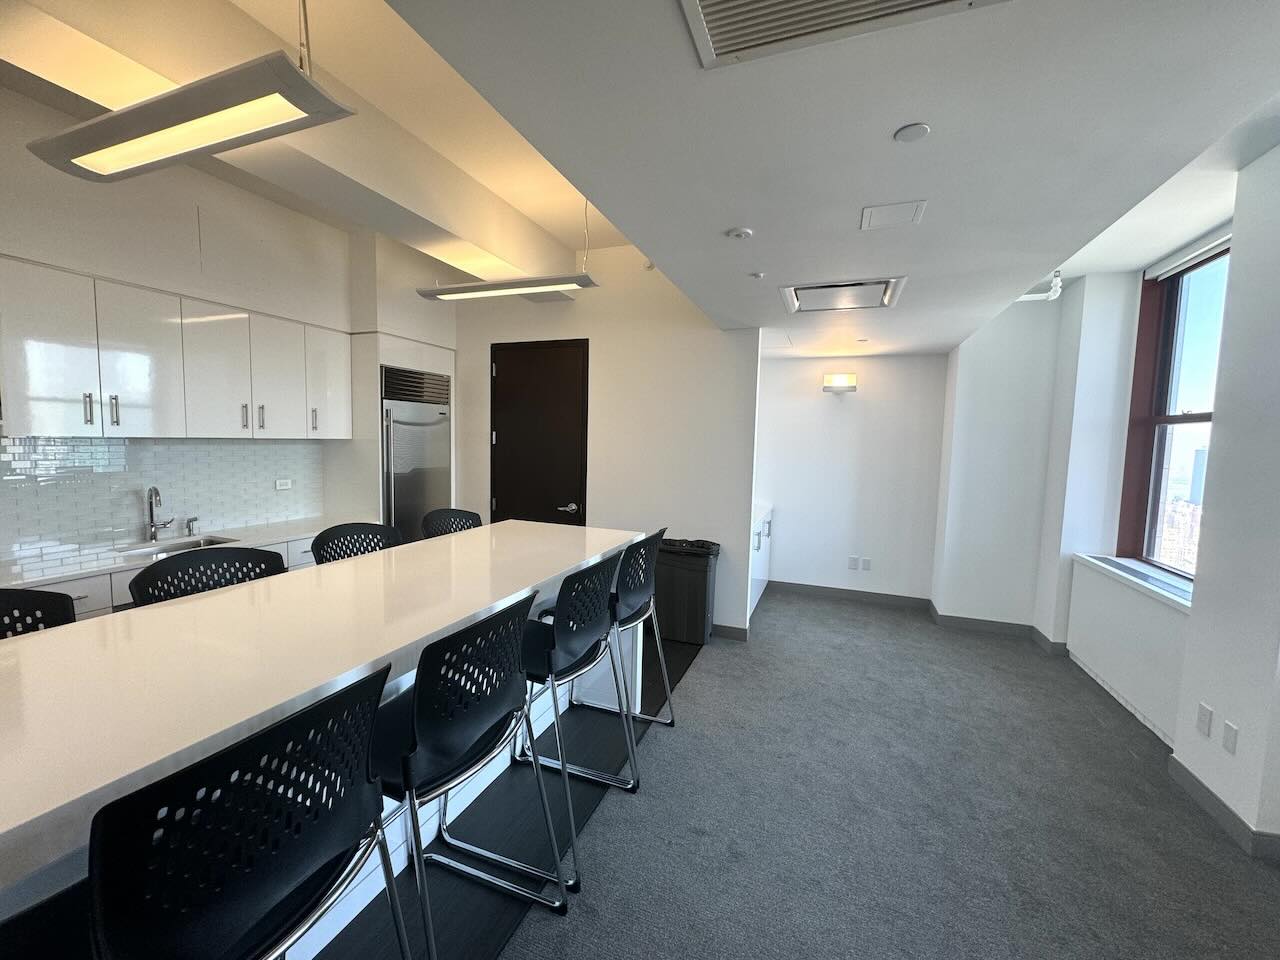 2,942 SF Corner Office Space for Lease on the 48th Floor of The Empire State Building.